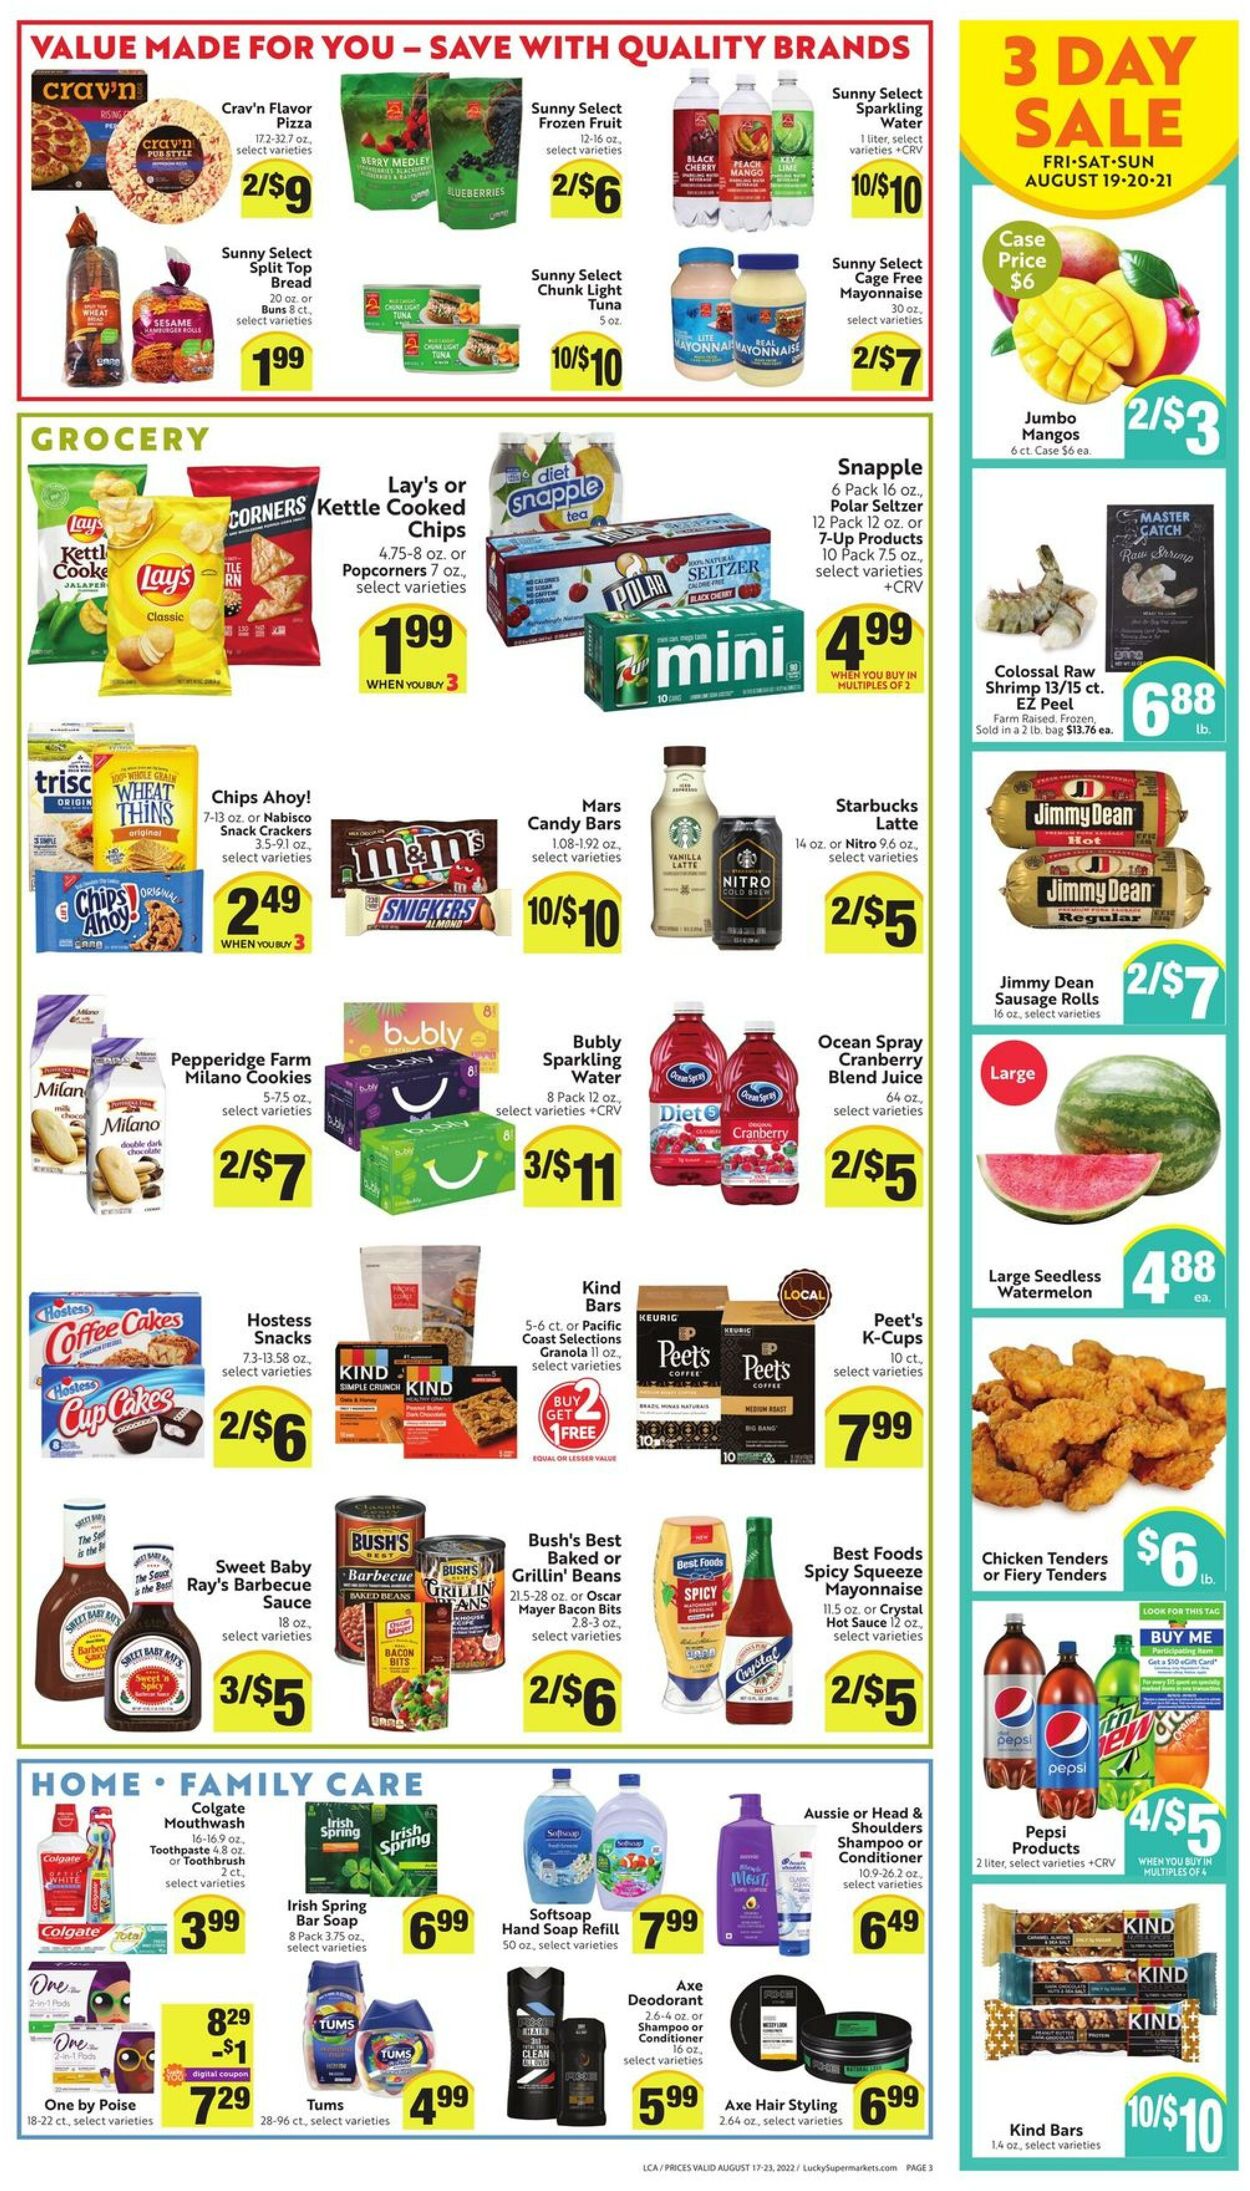 Weekly ad Lucky Supermarkets 08/17/2022 - 08/23/2022